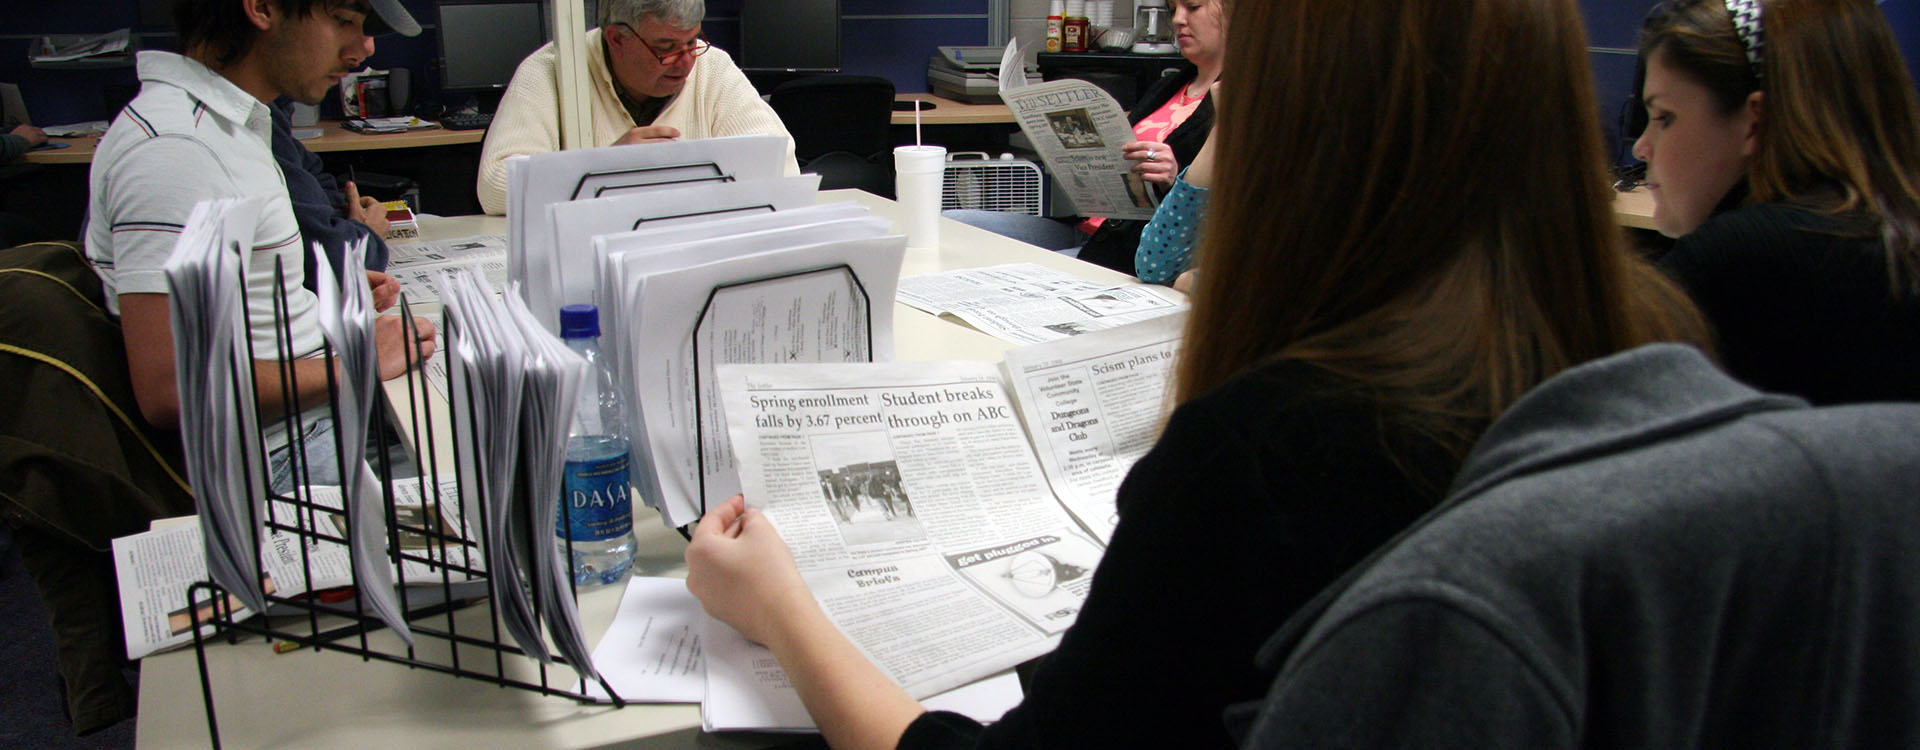 students working in the Settler newspaper office